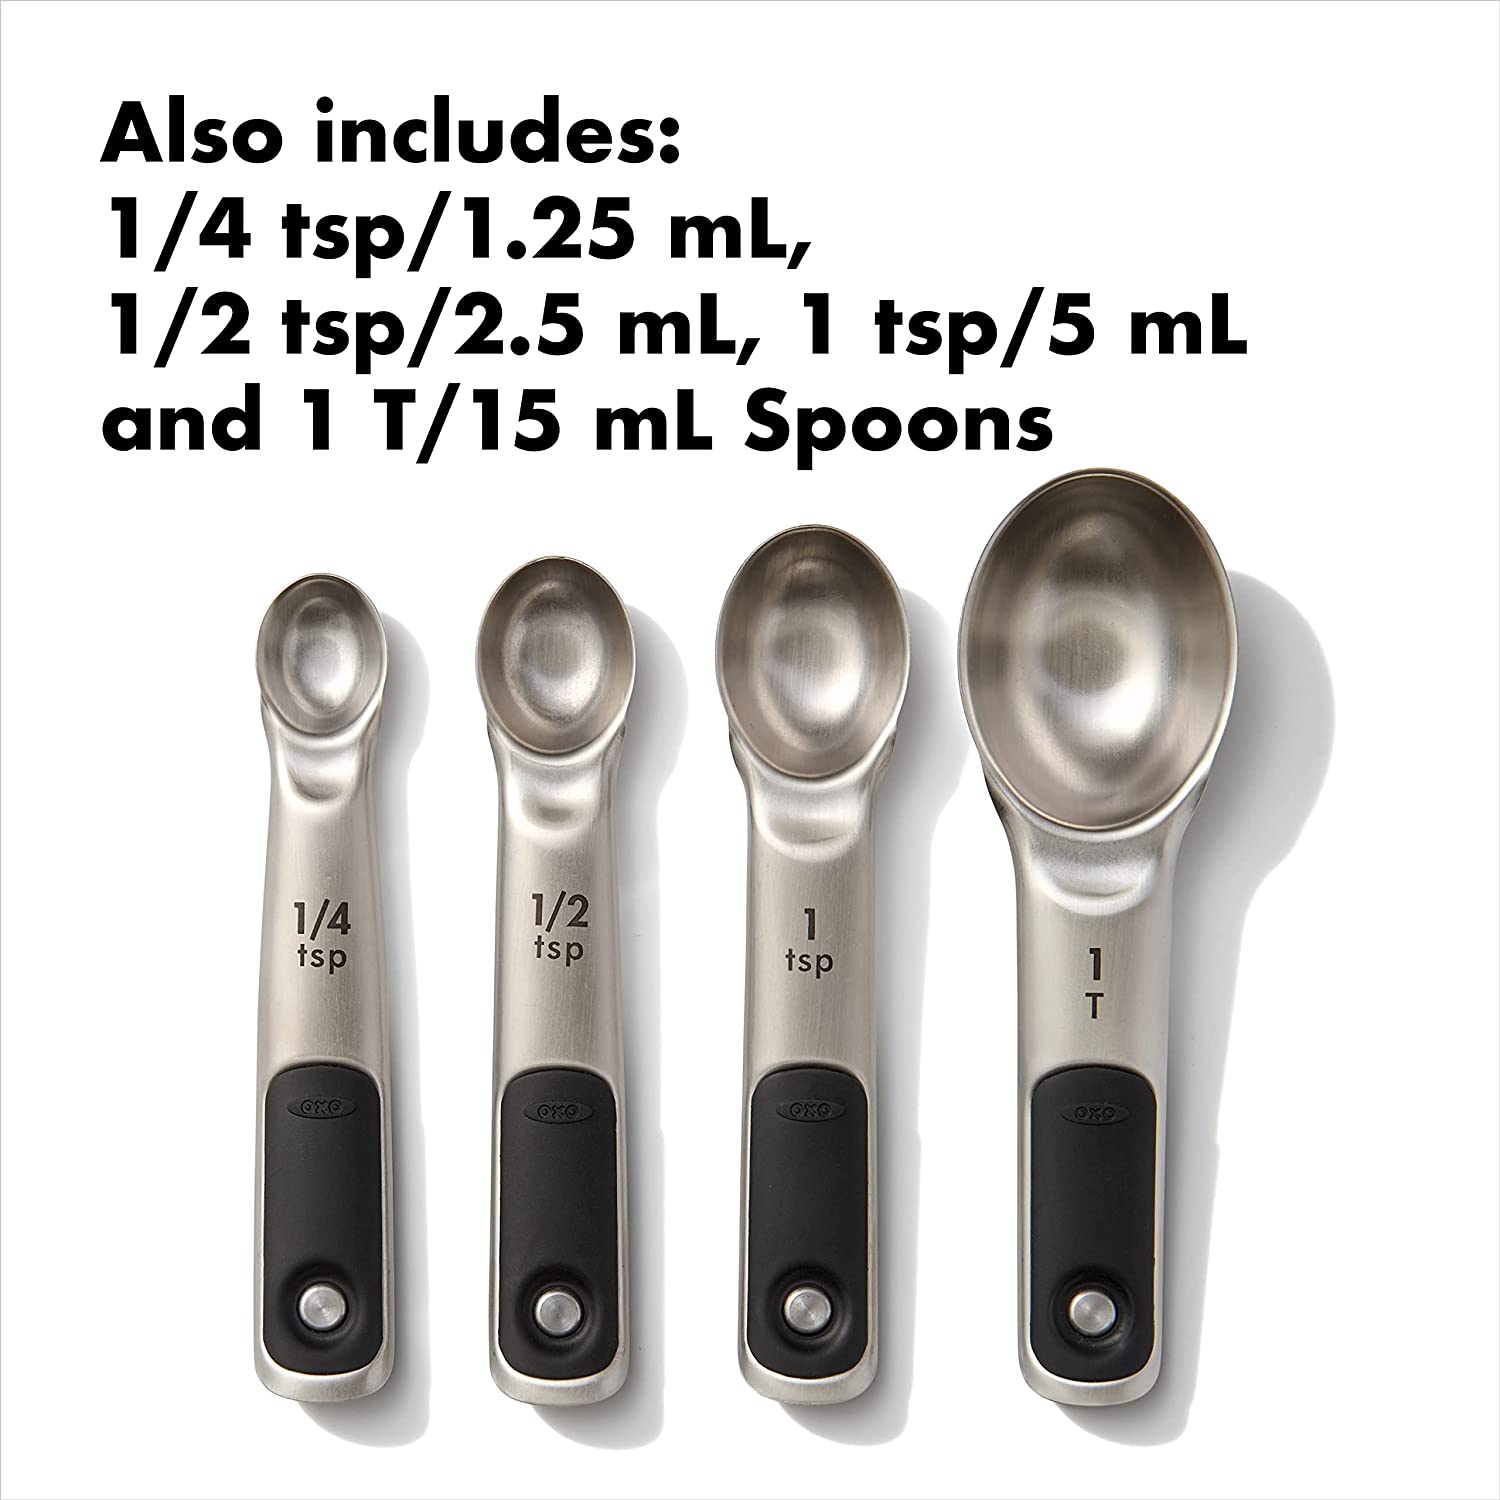 Good Grips Measuring Cup Set, Stainless Steel, 4 Piece